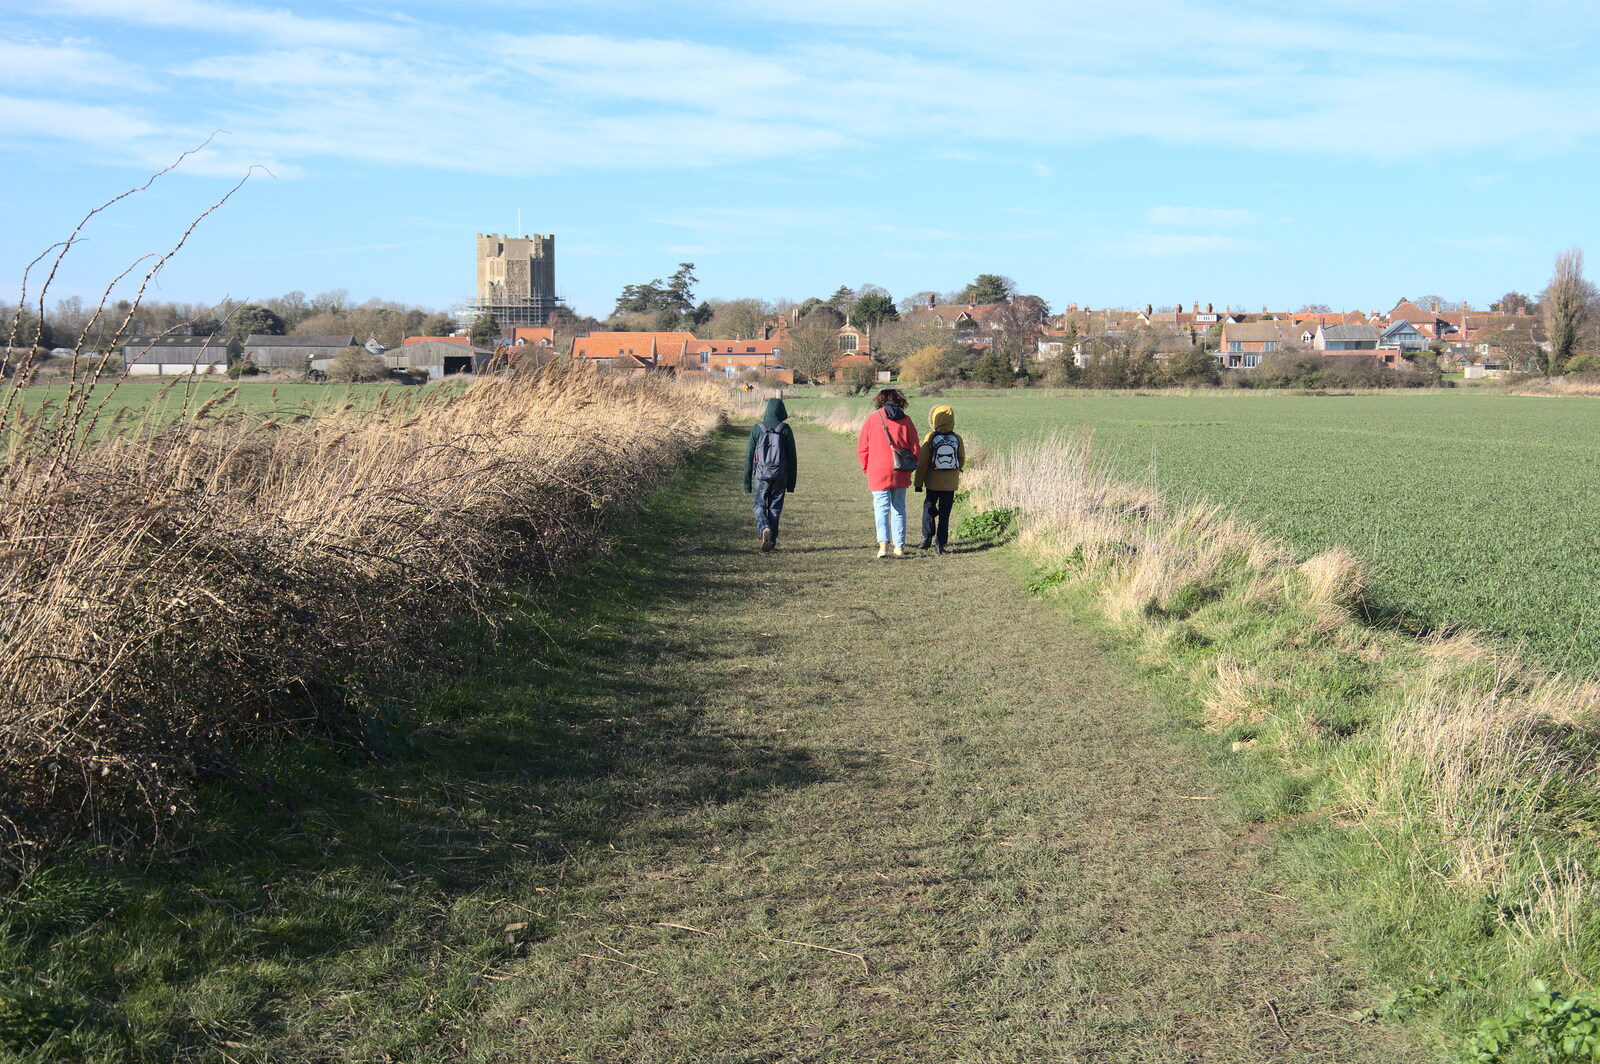 On the path to Orford from A Trip to Orford Castle, Orford, Suffolk - 26th February 2022